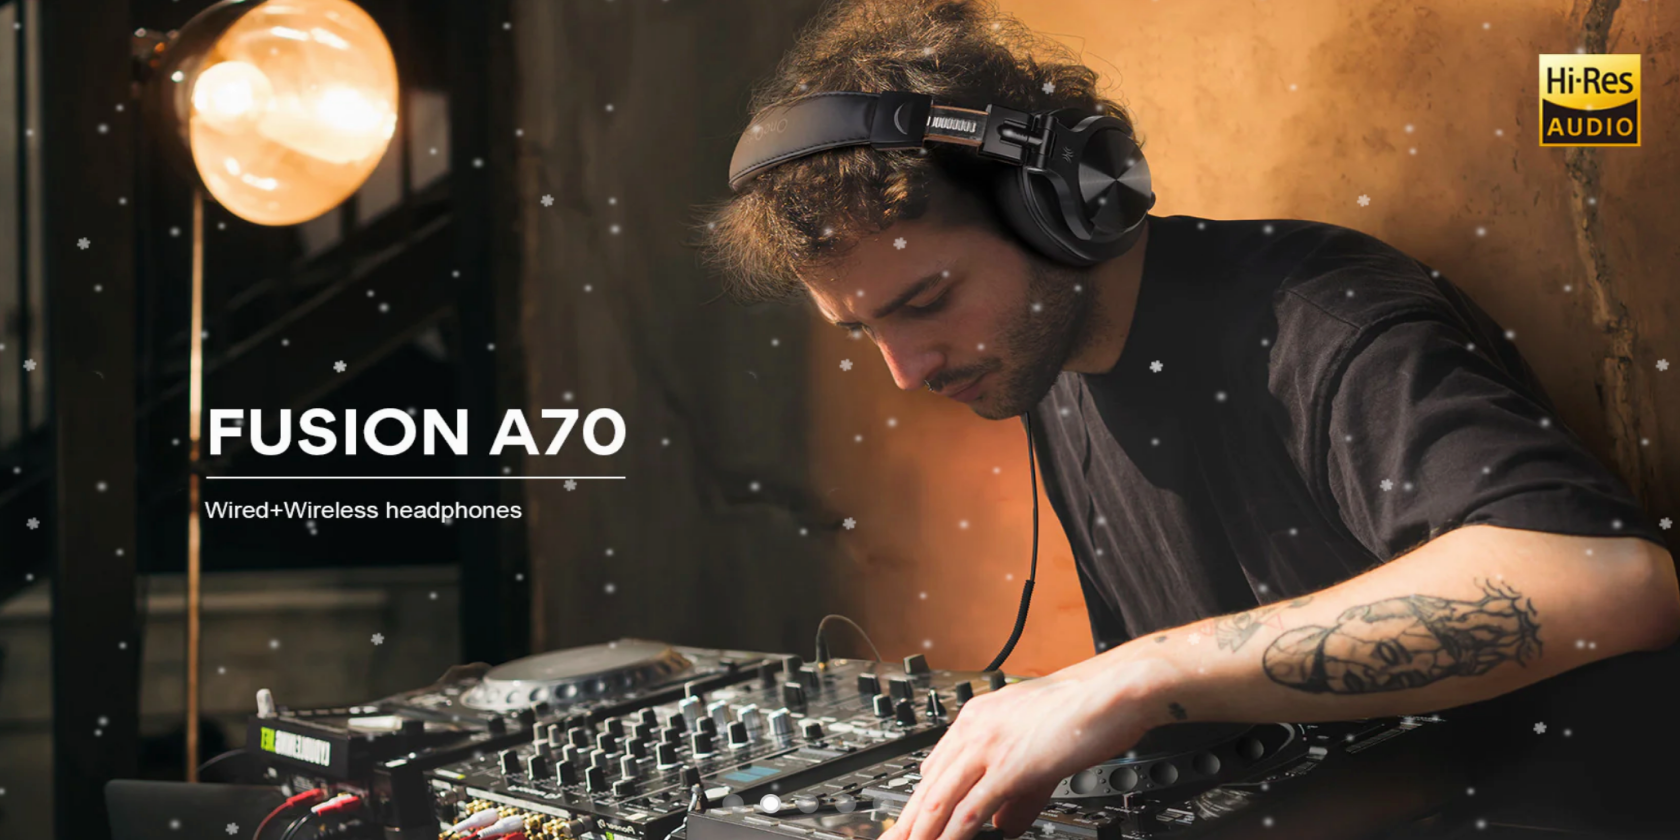 A sound engineer wearing OneOdio Fusion A70 headphones at a mixing desk.